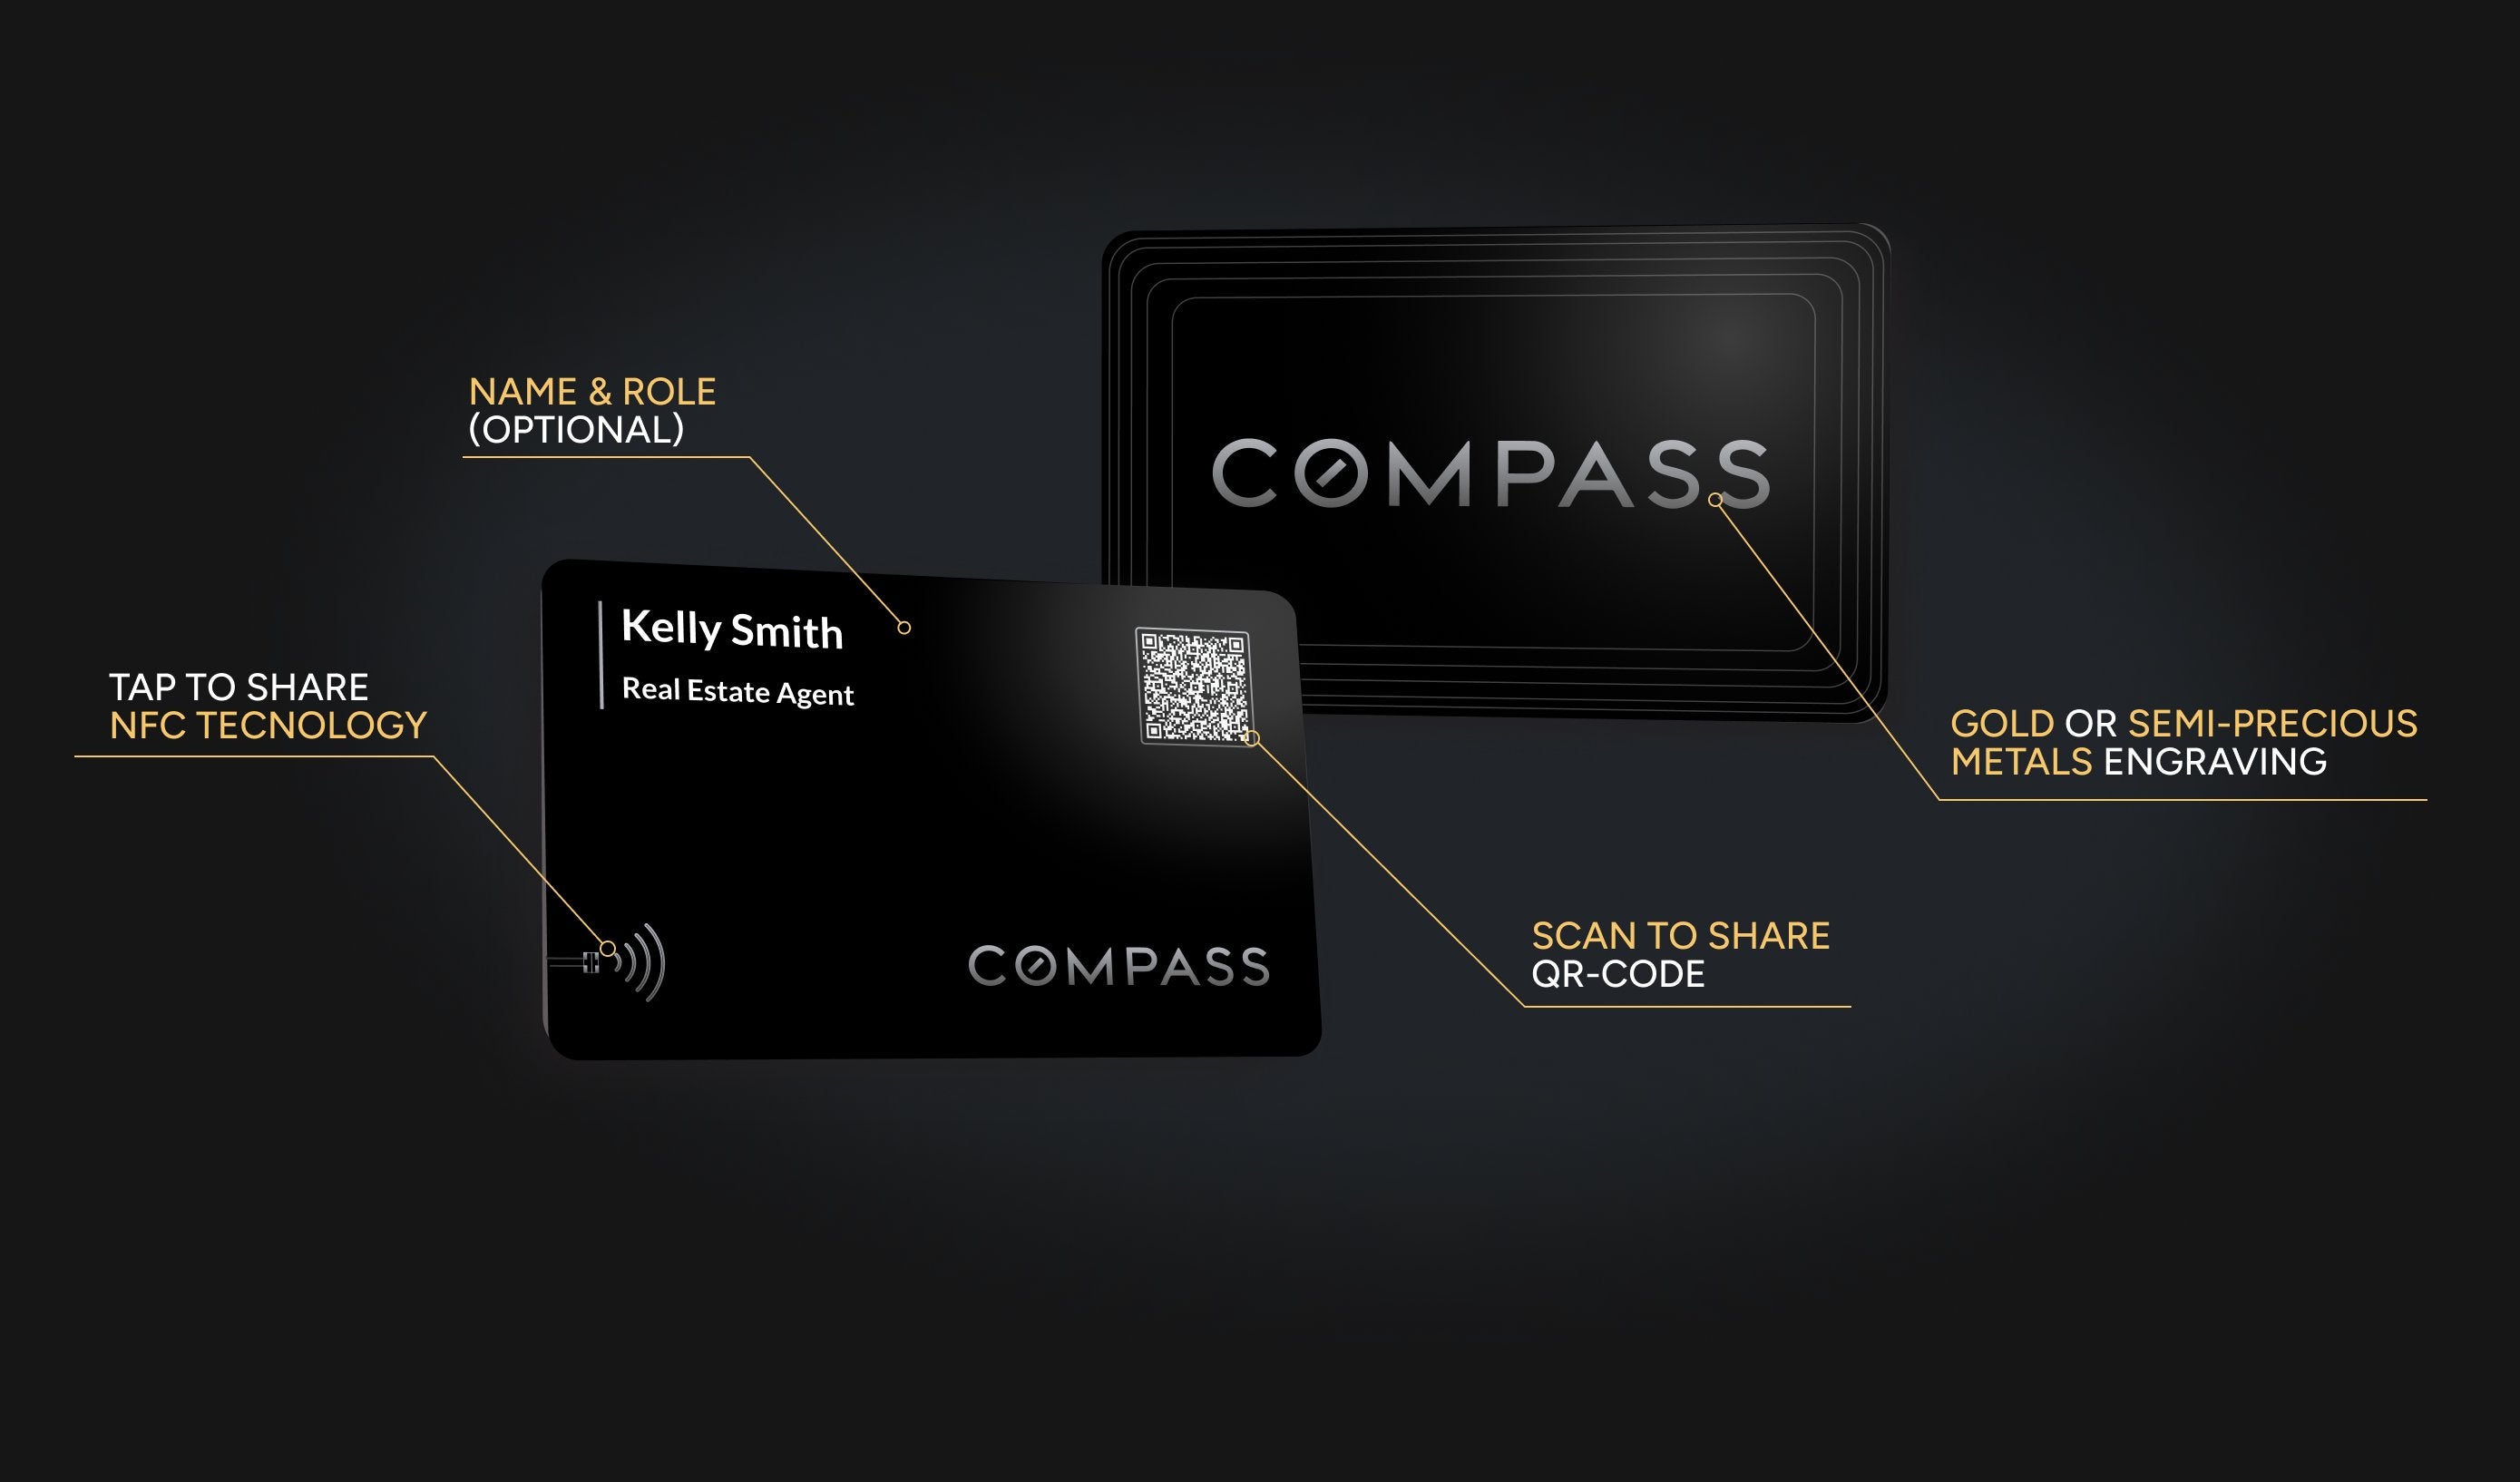 COMPASS BRANDED SMART BUSINESS CARDS